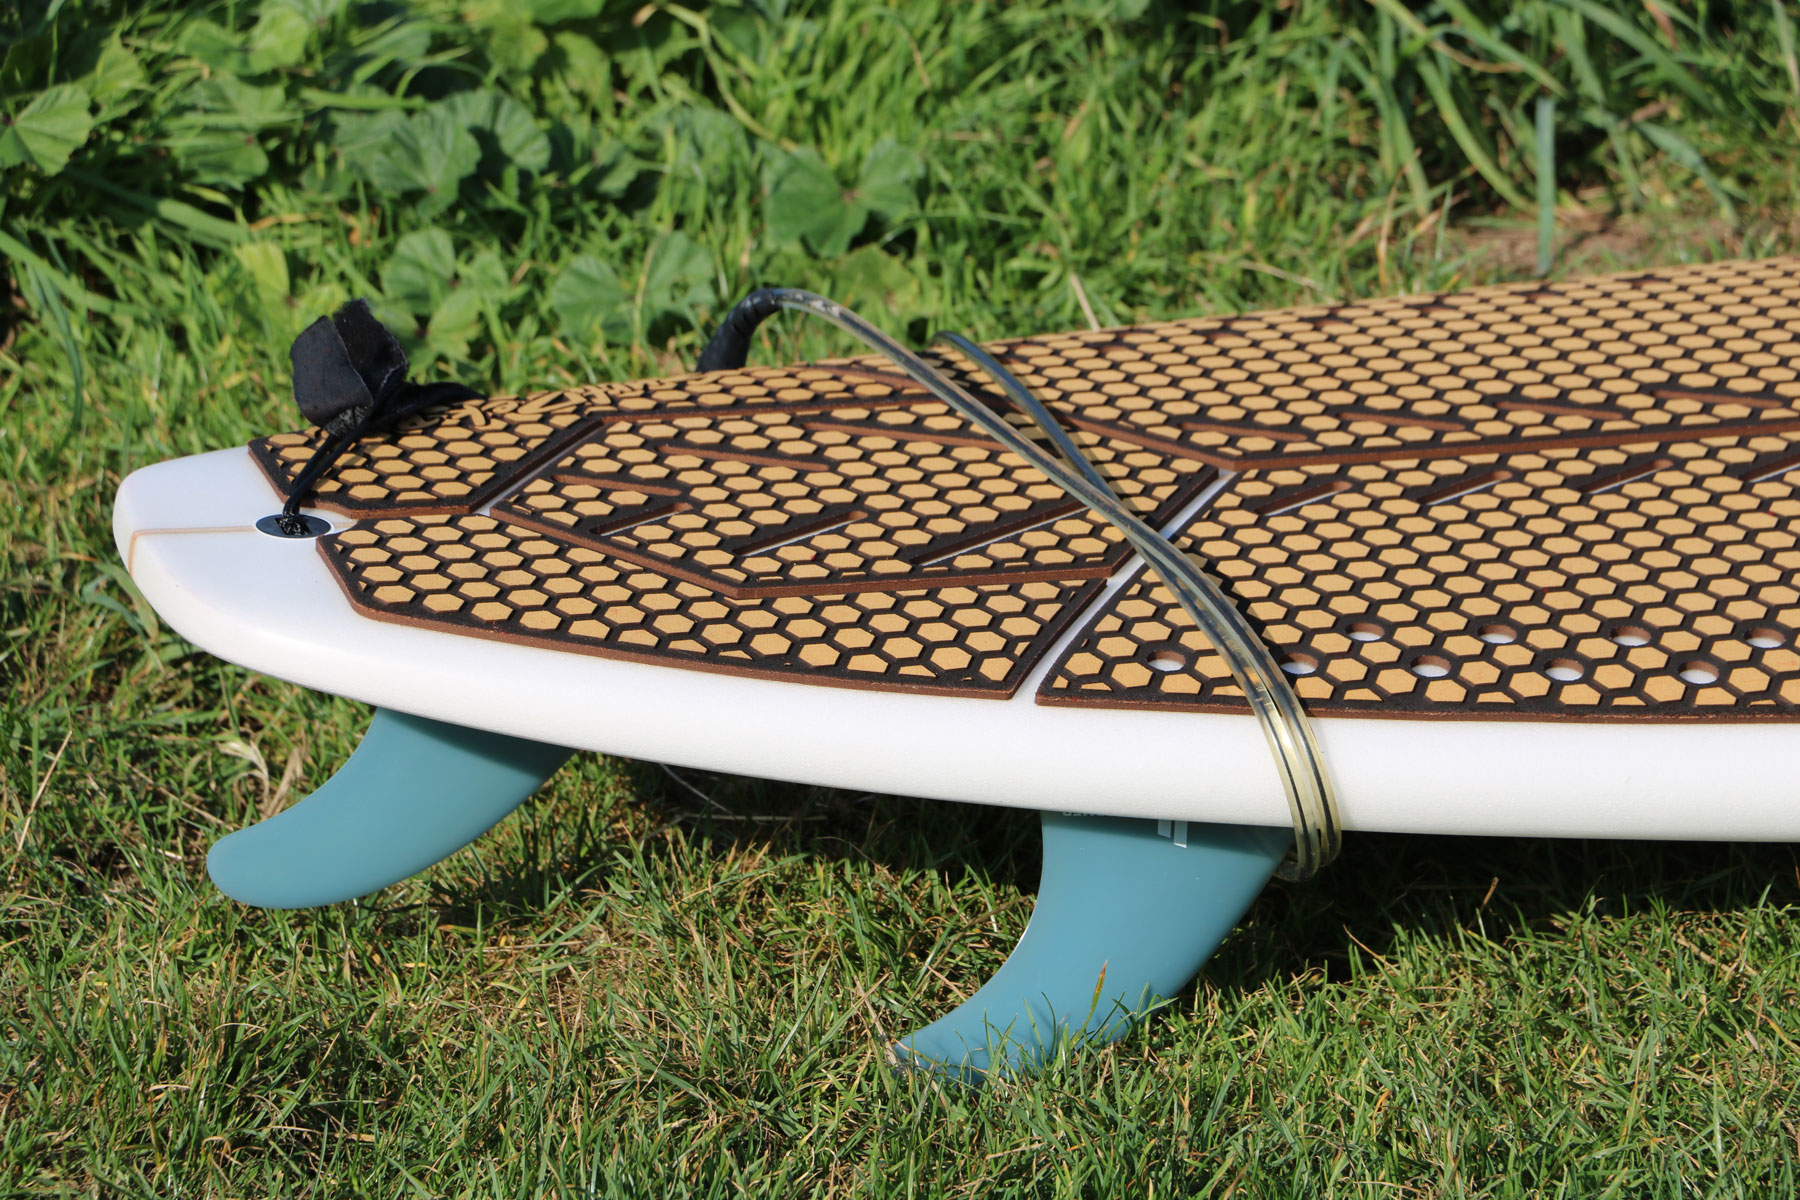 How to install a surfboard traction pad